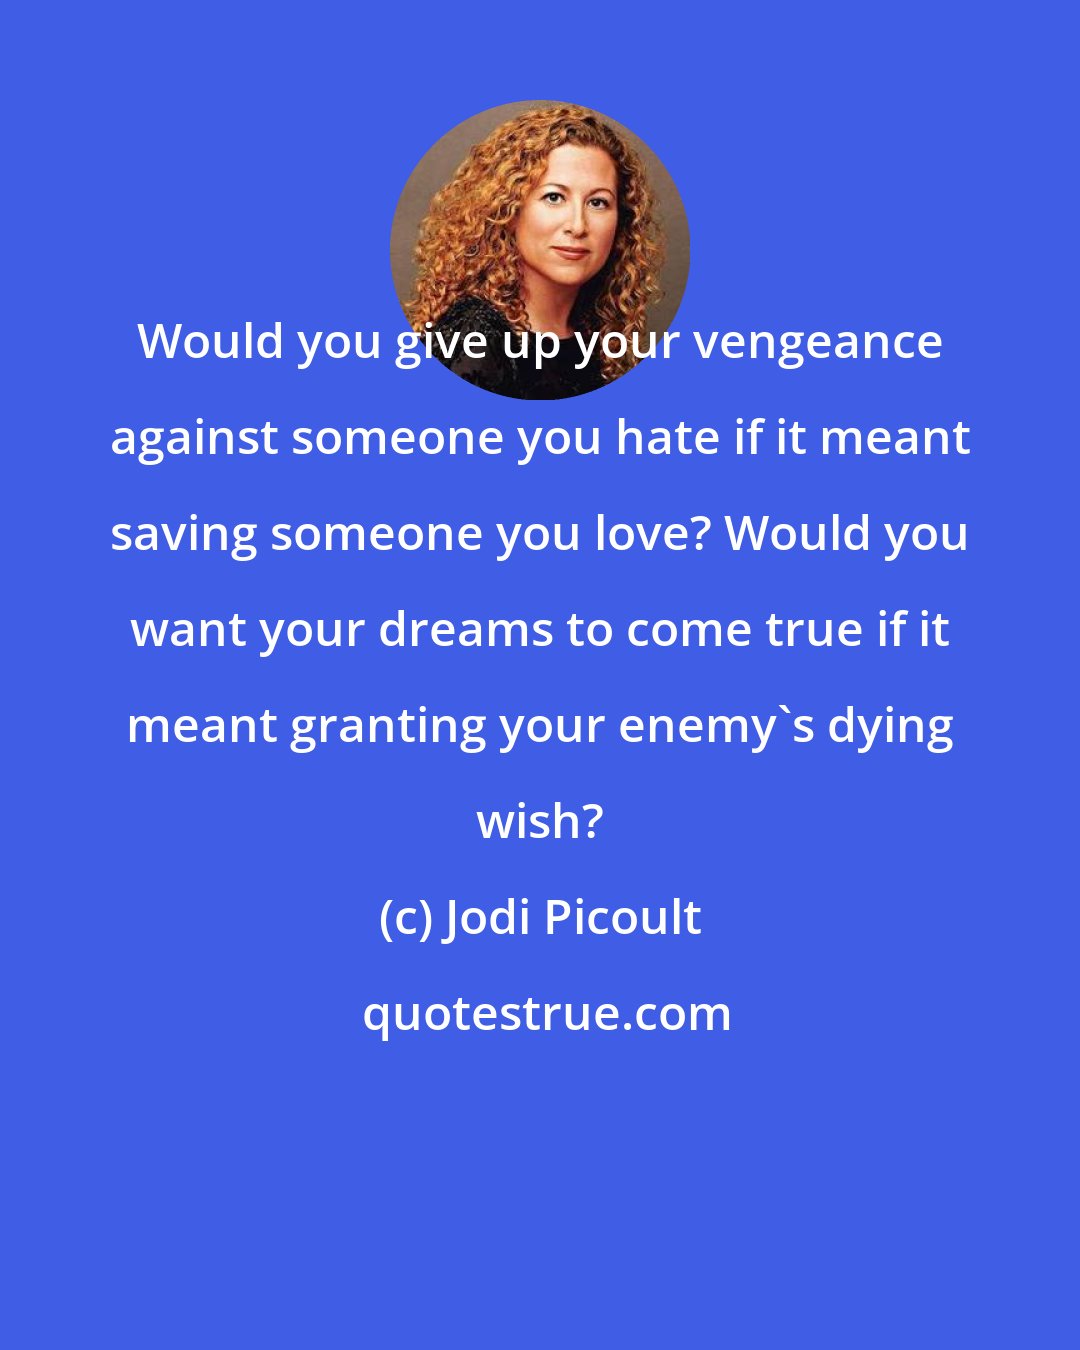 Jodi Picoult: Would you give up your vengeance against someone you hate if it meant saving someone you love? Would you want your dreams to come true if it meant granting your enemy's dying wish?